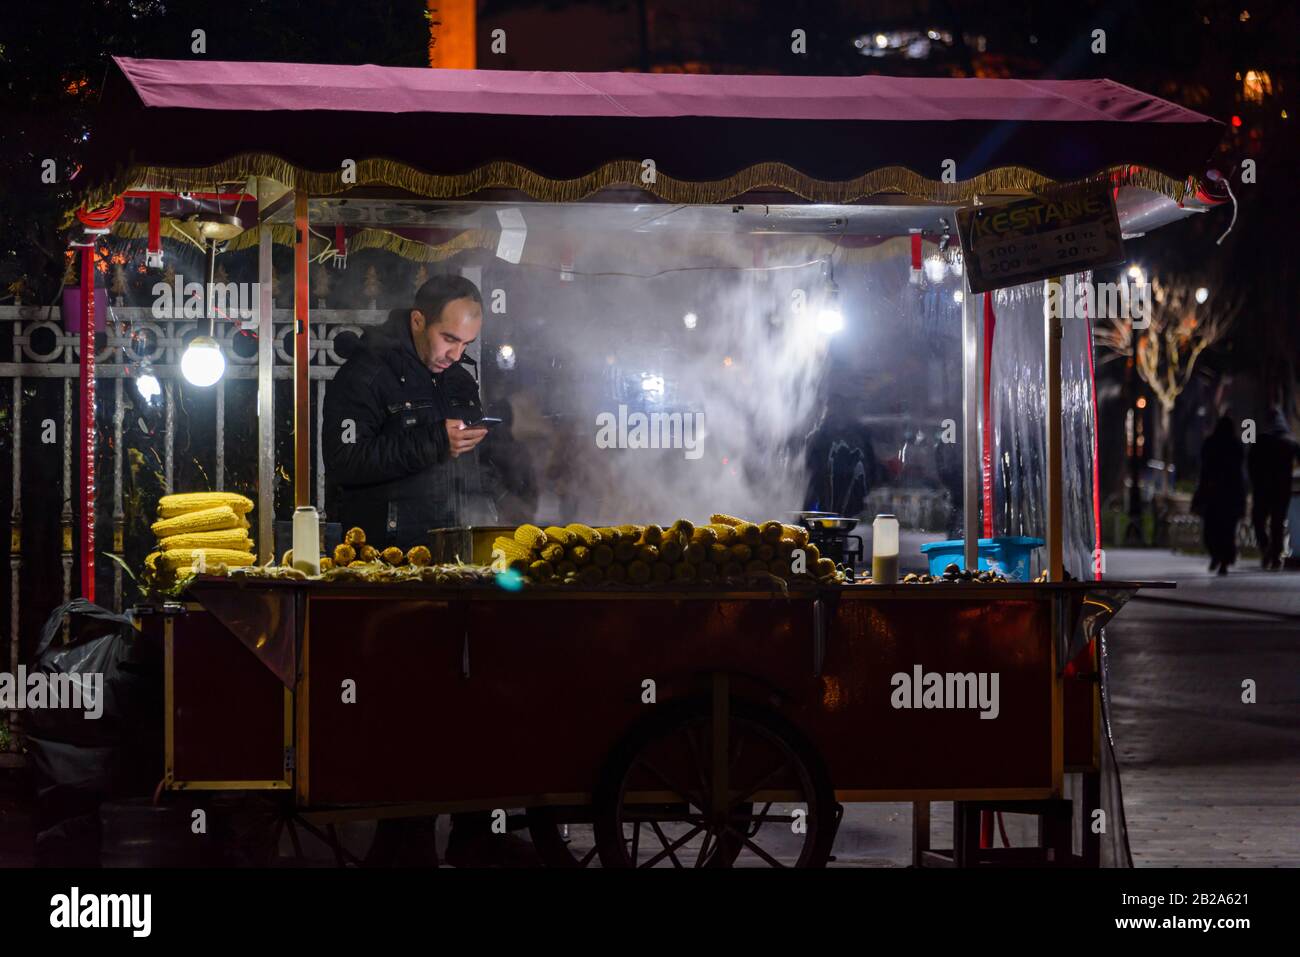 Street vendor selling roasted chestnuts and sweetcorn from a stall at night, Istanbul, Turkey. Stock Photo